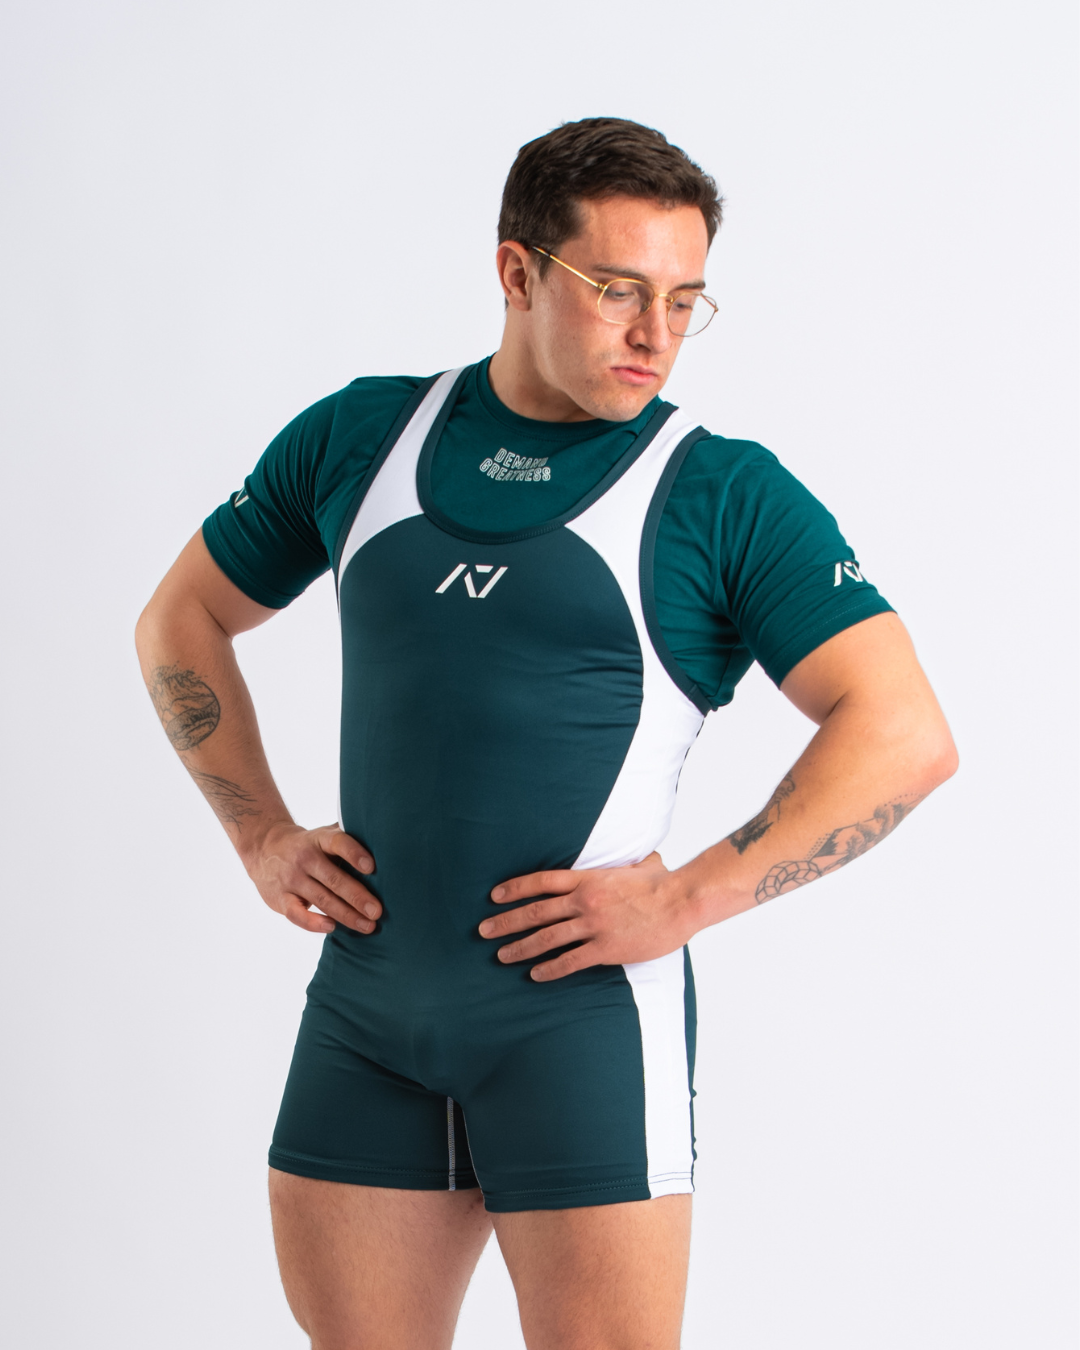 A7 IPF Approved Emerald Forás Luno singlet features extra lat mobility, side panel stitching to guide the squat depth level and curved panel design for a slimming look.  The IPF Approved Kit includes Luno Powerlifting Singlet, A7 Meet Shirt, A7 Zebra Wrist Wraps, A7 Deadlift Socks, Hourglass Knee Sleeves (Stiff Knee Sleeves and Rigor Mortis Knee Sleeves). Genouill�res powerlifting shipping to France, Spain, Ireland, Germany, Italy, Sweden and EU.